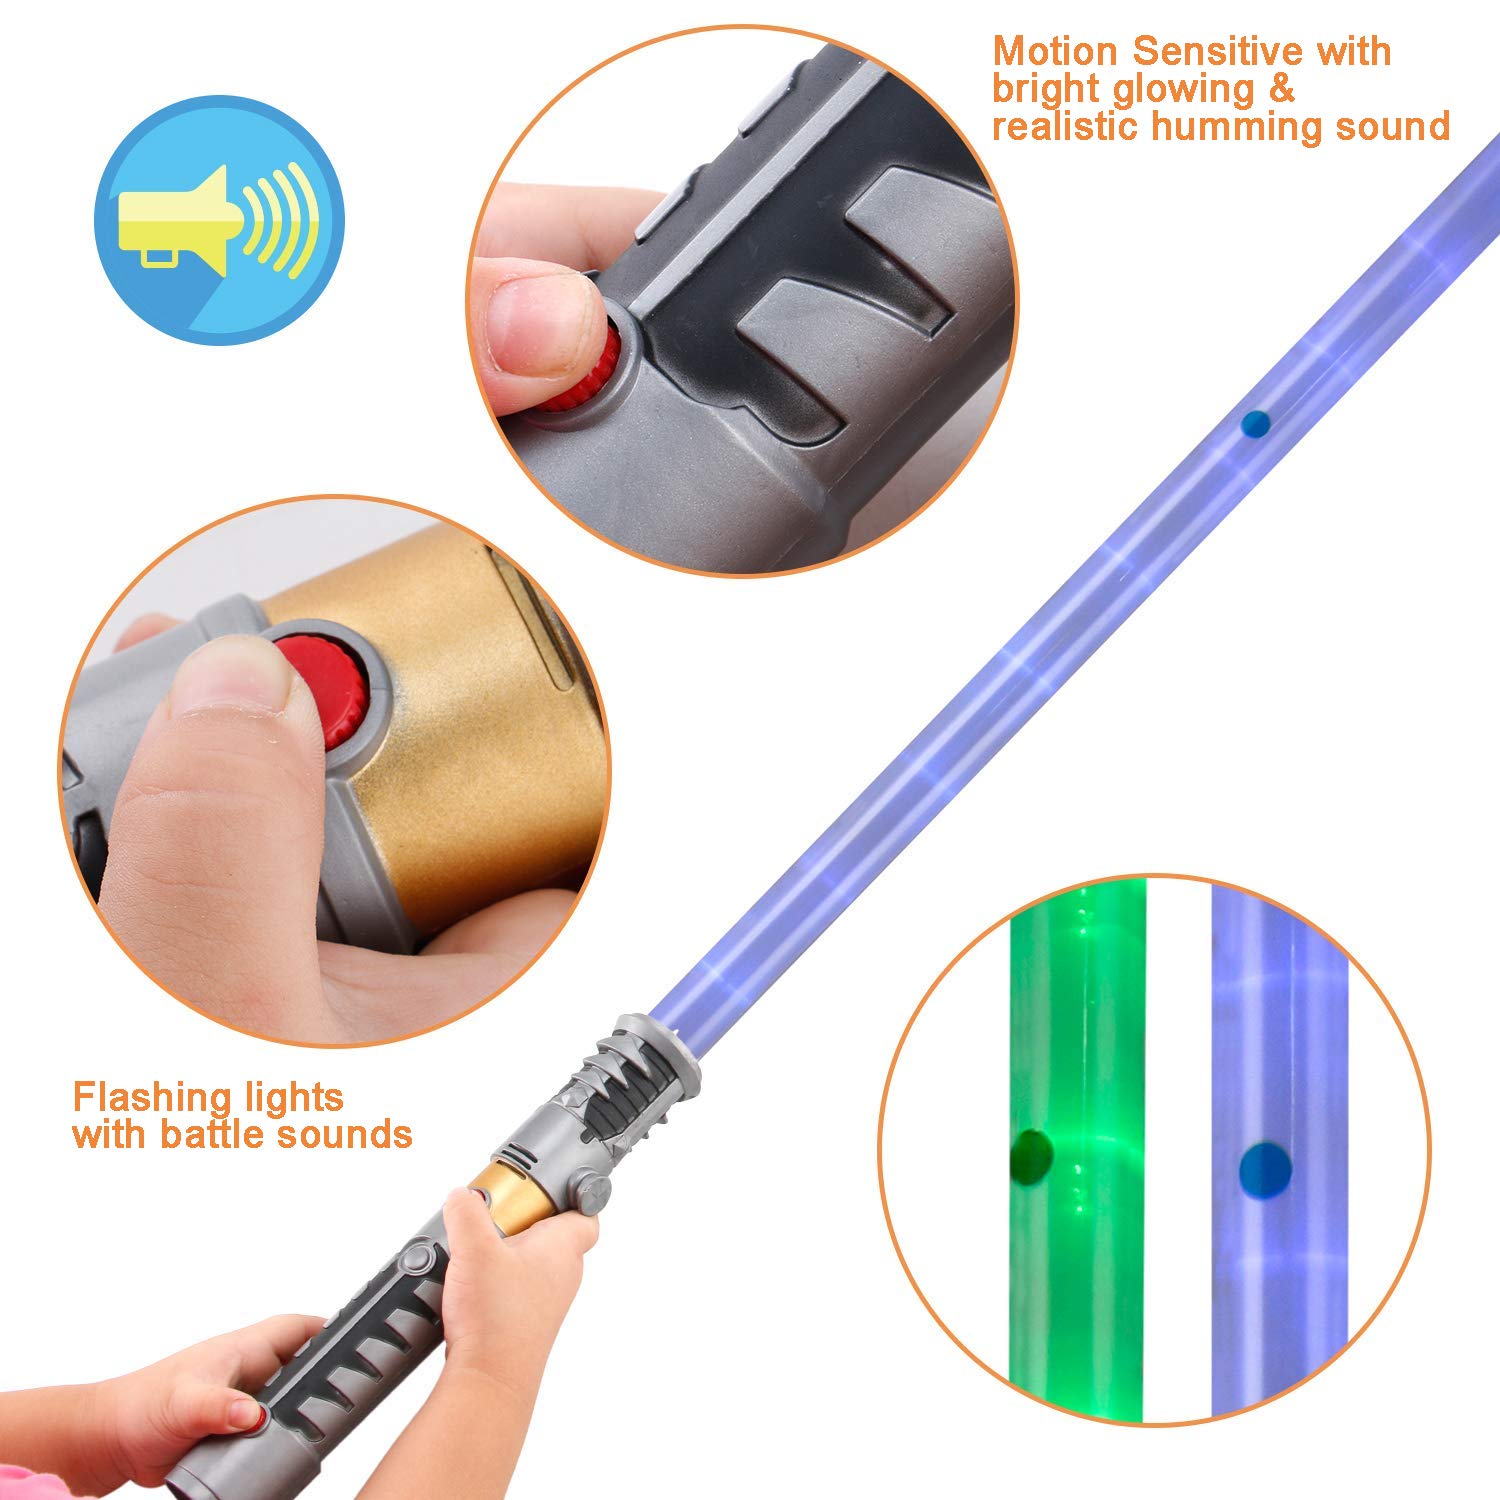 2-in-1 LED Light Up Swords Set FX Double Bladed Dual Sabers with Motion Sensitive Sound Effects (2 Pack)